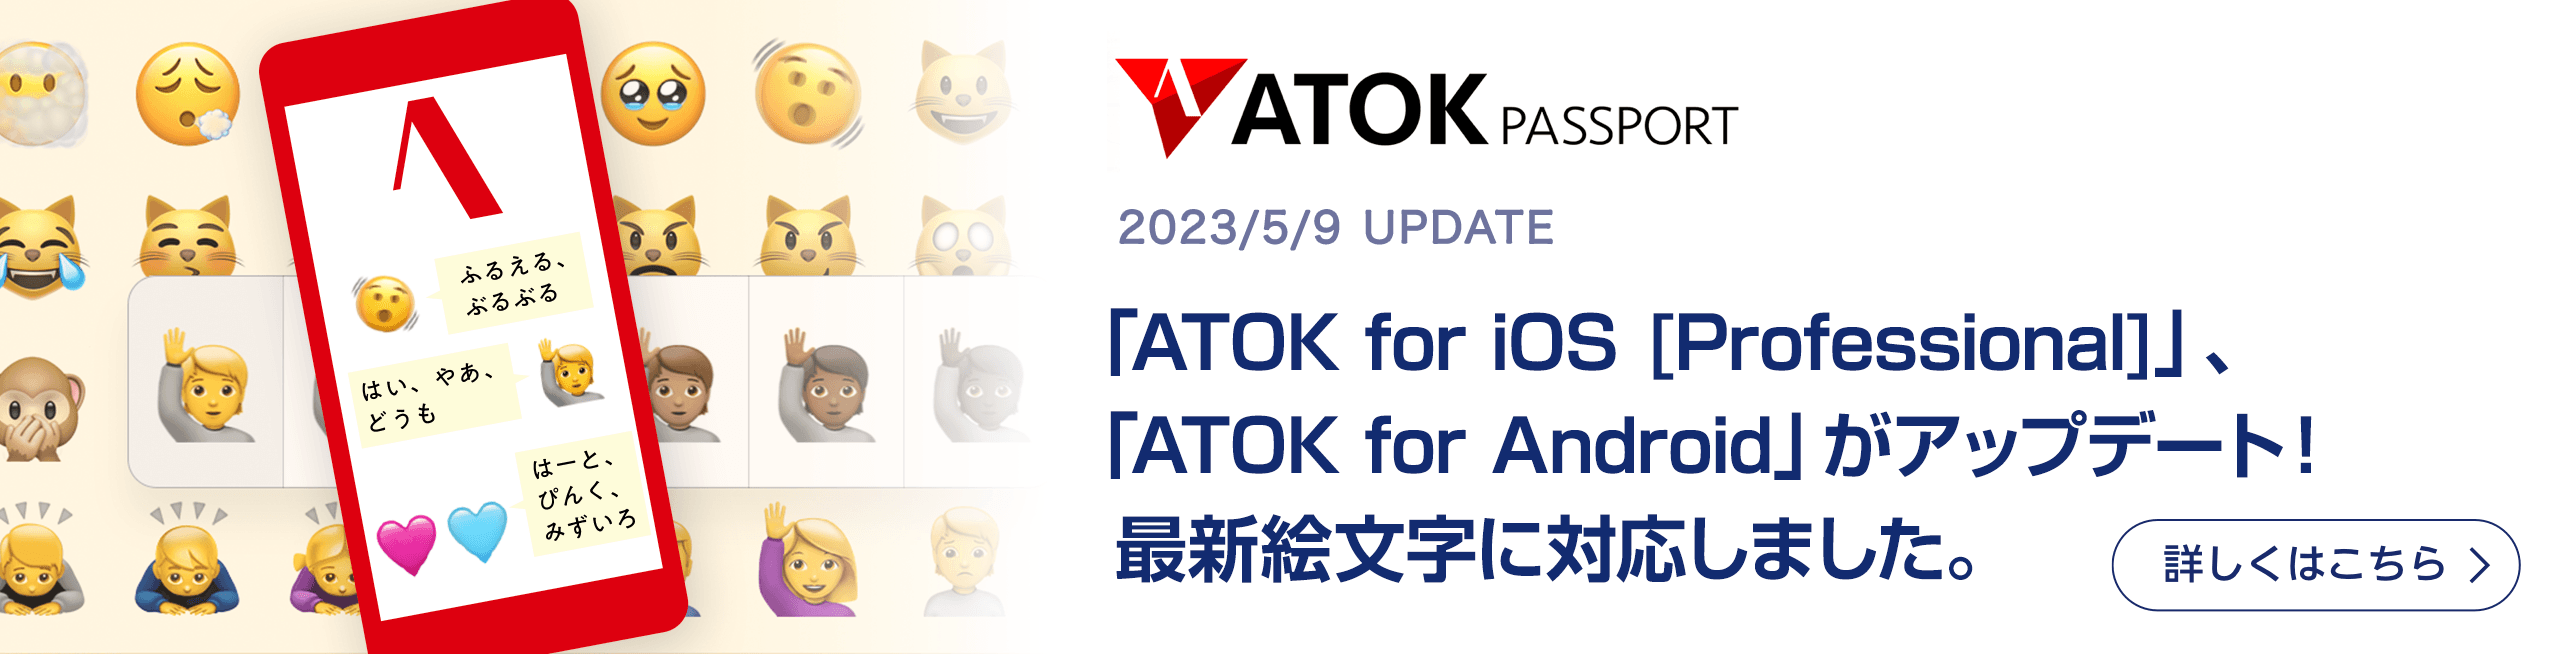 「ATOK for iOS [Professional]」、「ATOK for Android」がアップデート！最新絵文字に対応。